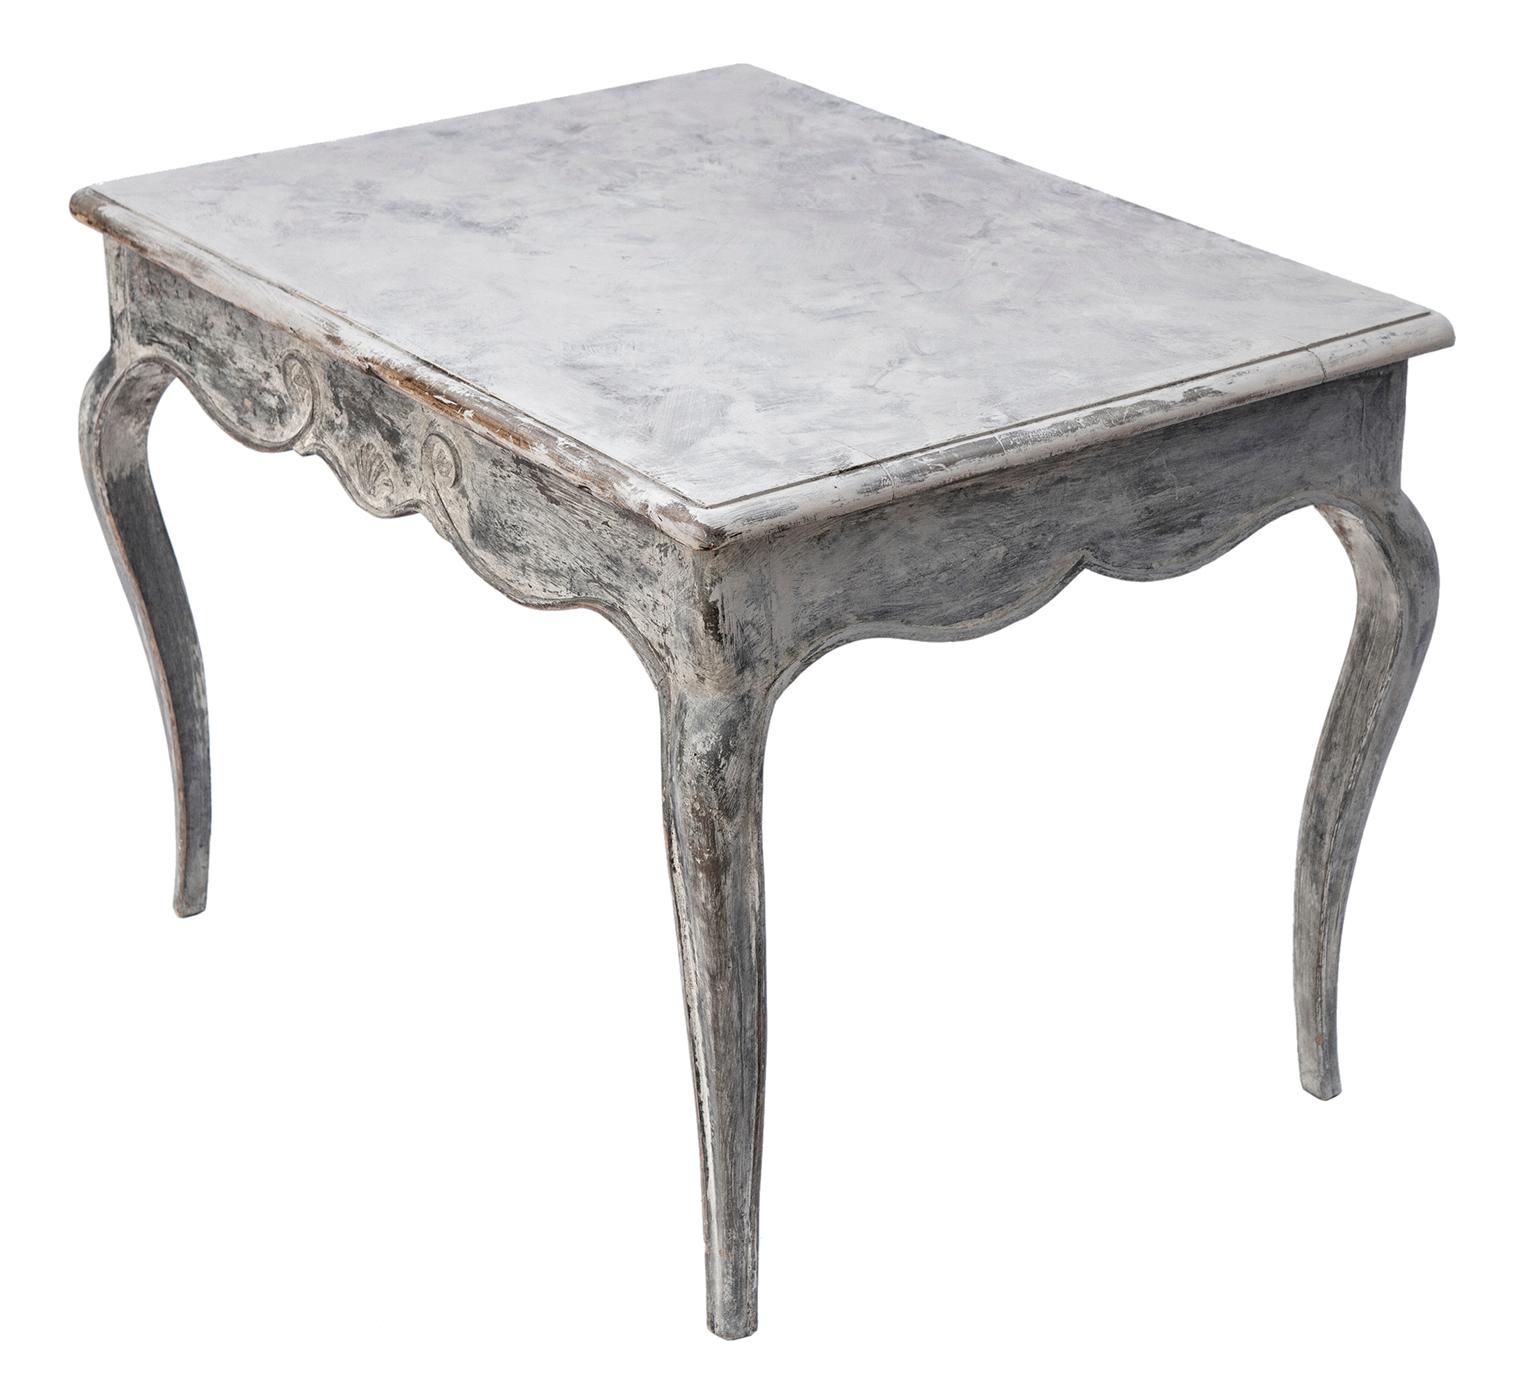 French Provincial occasional table with carved details on the apron.
Provincial style legs in the original whitewash finish.
The top has been newly finished to blend with the apron, then topped with durable clear wax.
20th century made, solid